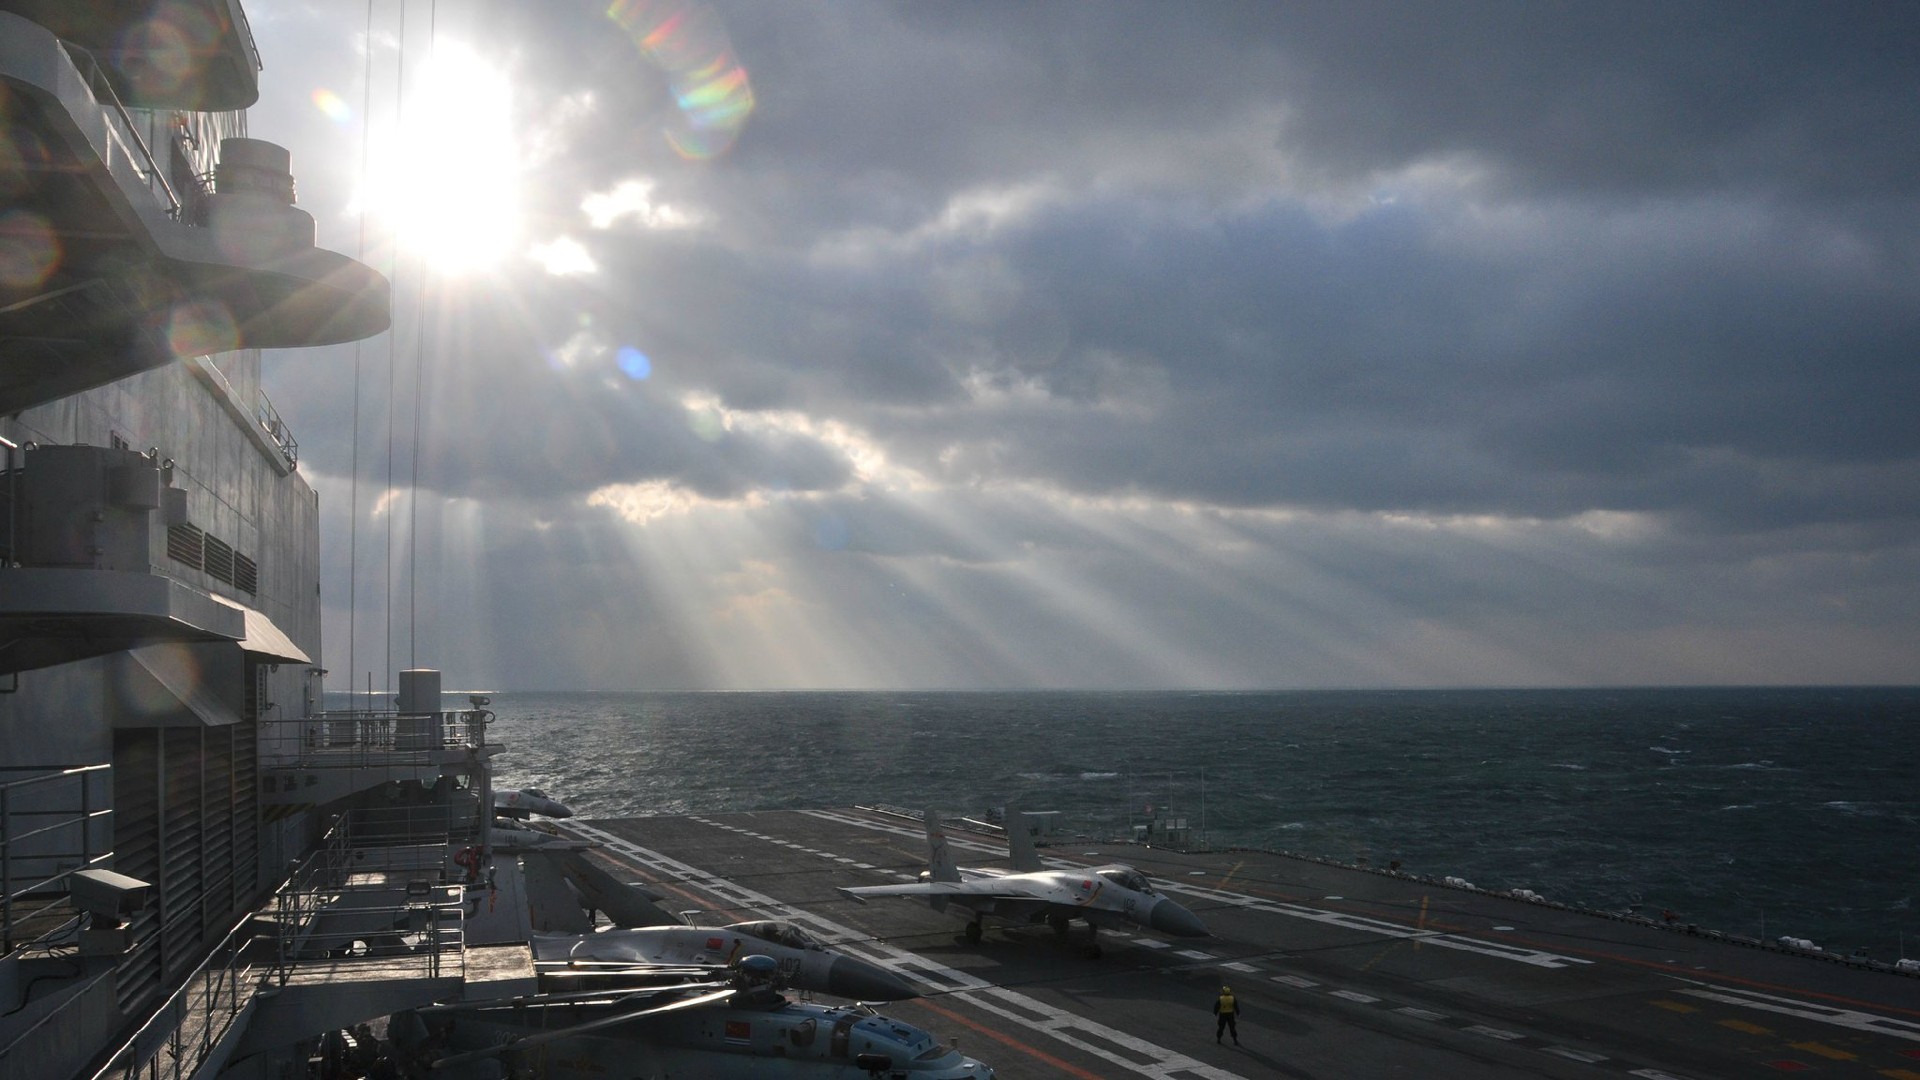 General 1920x1080 aircraft carrier flight deck People's Liberation Army Navy sea warship navy China Sun sunlight crepuscular rays clouds shining sun rays Sukhoi Su-30 jet fighter